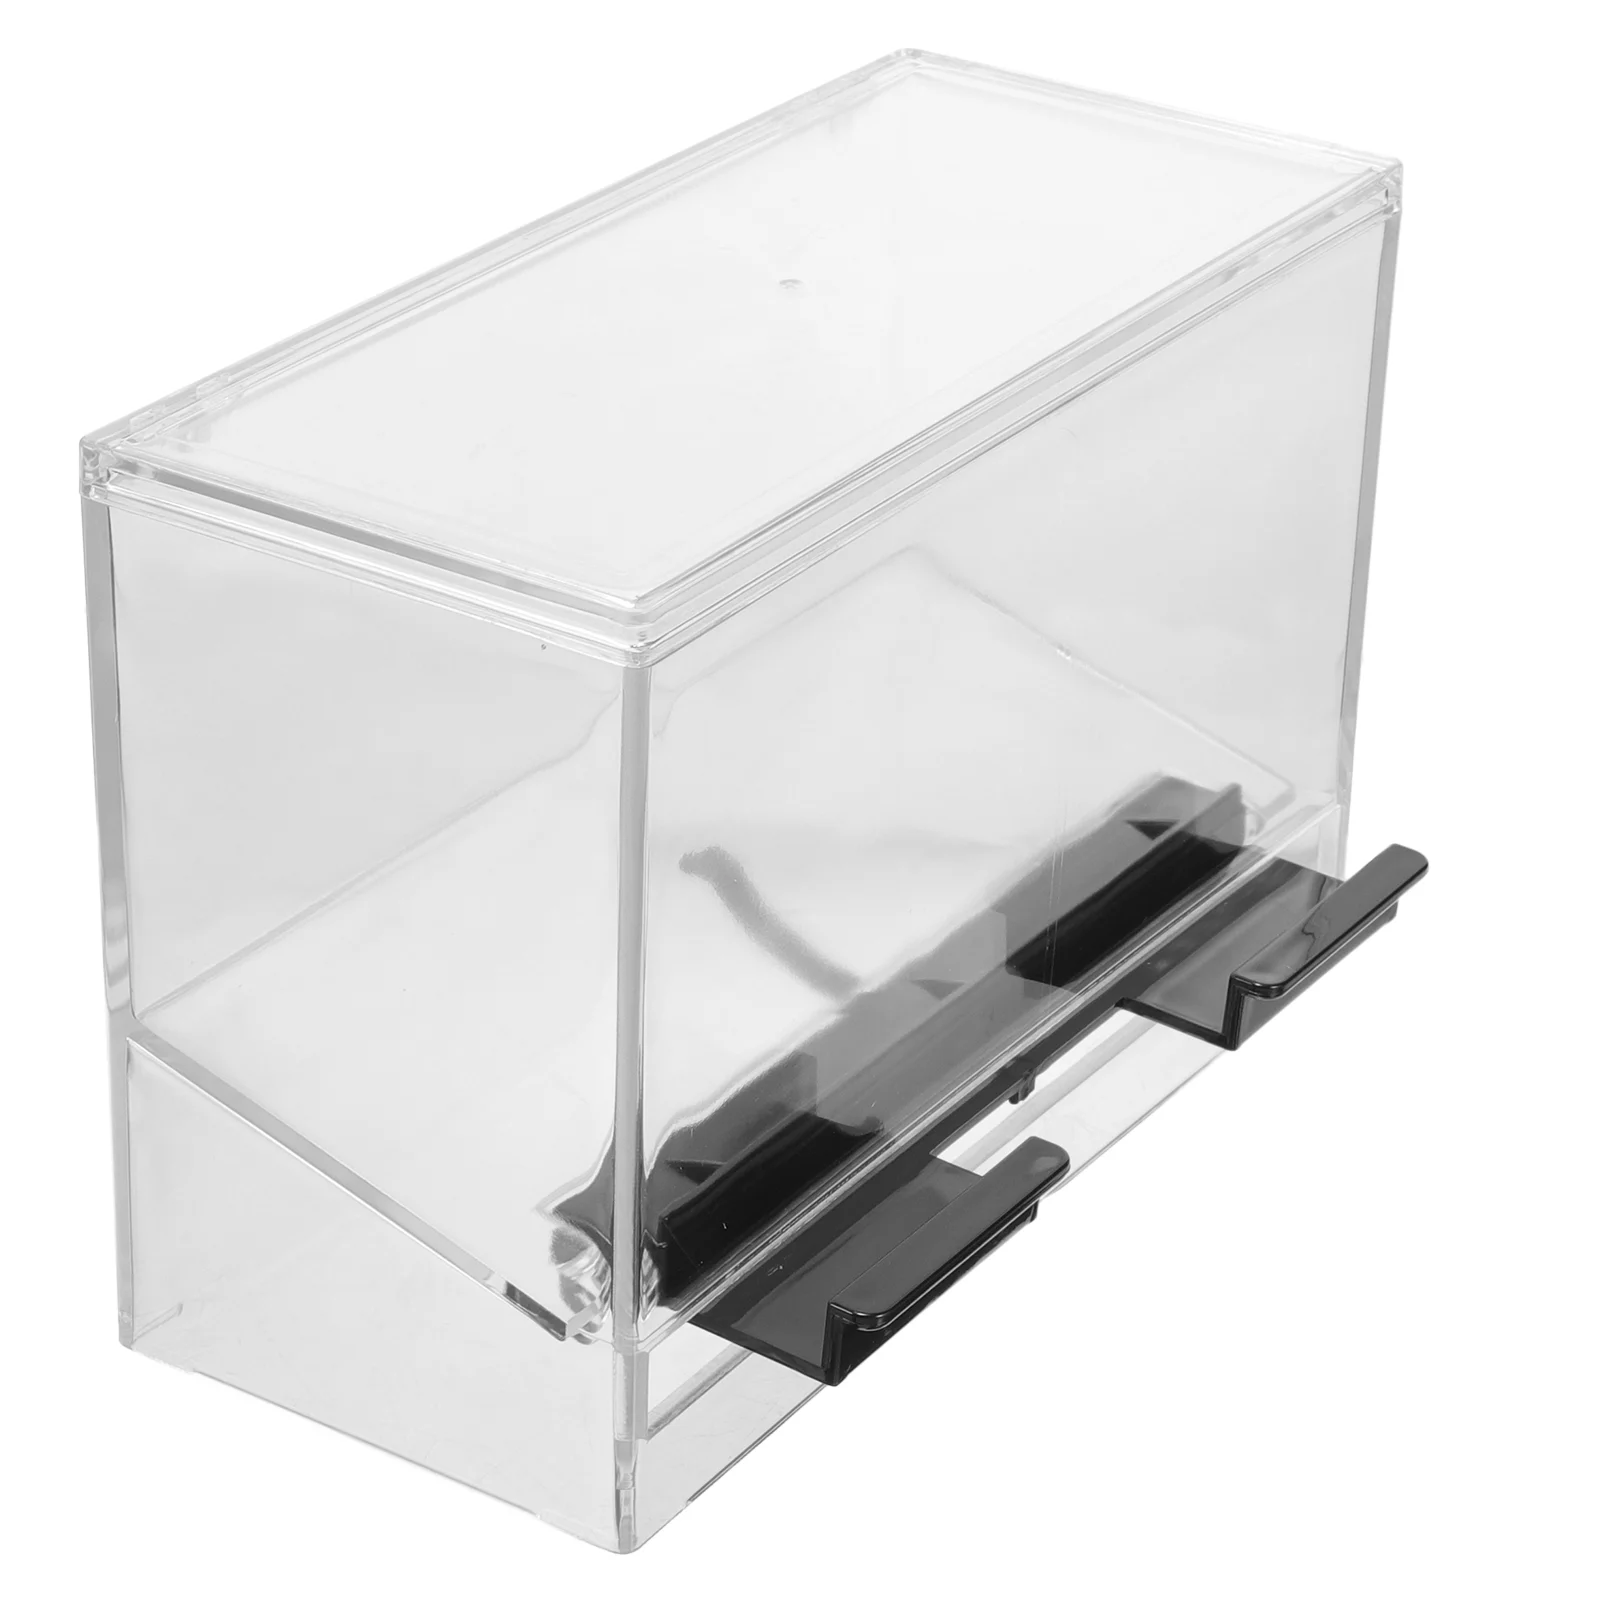 

Self-service Straw Box Straws Clear Dispenser Acrylic Container Counter Case Restaurant Storage Reusable Pressing Holder